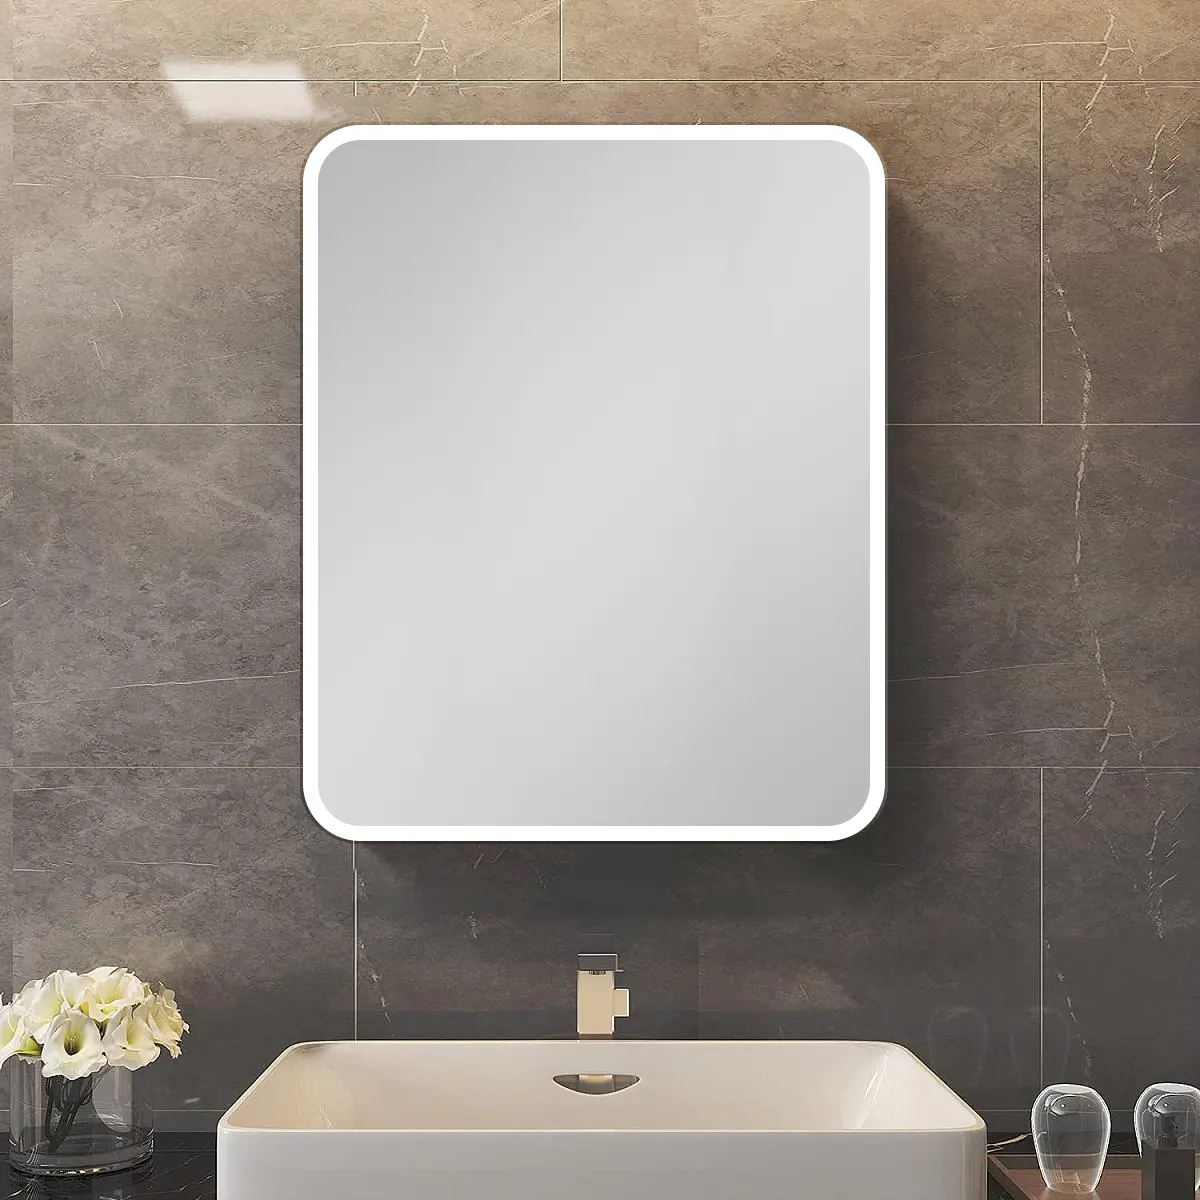 24×30 Inch Silver Metal Framed Wall Mount or Recessed Bathroom Medicine Cabinet with Mirror